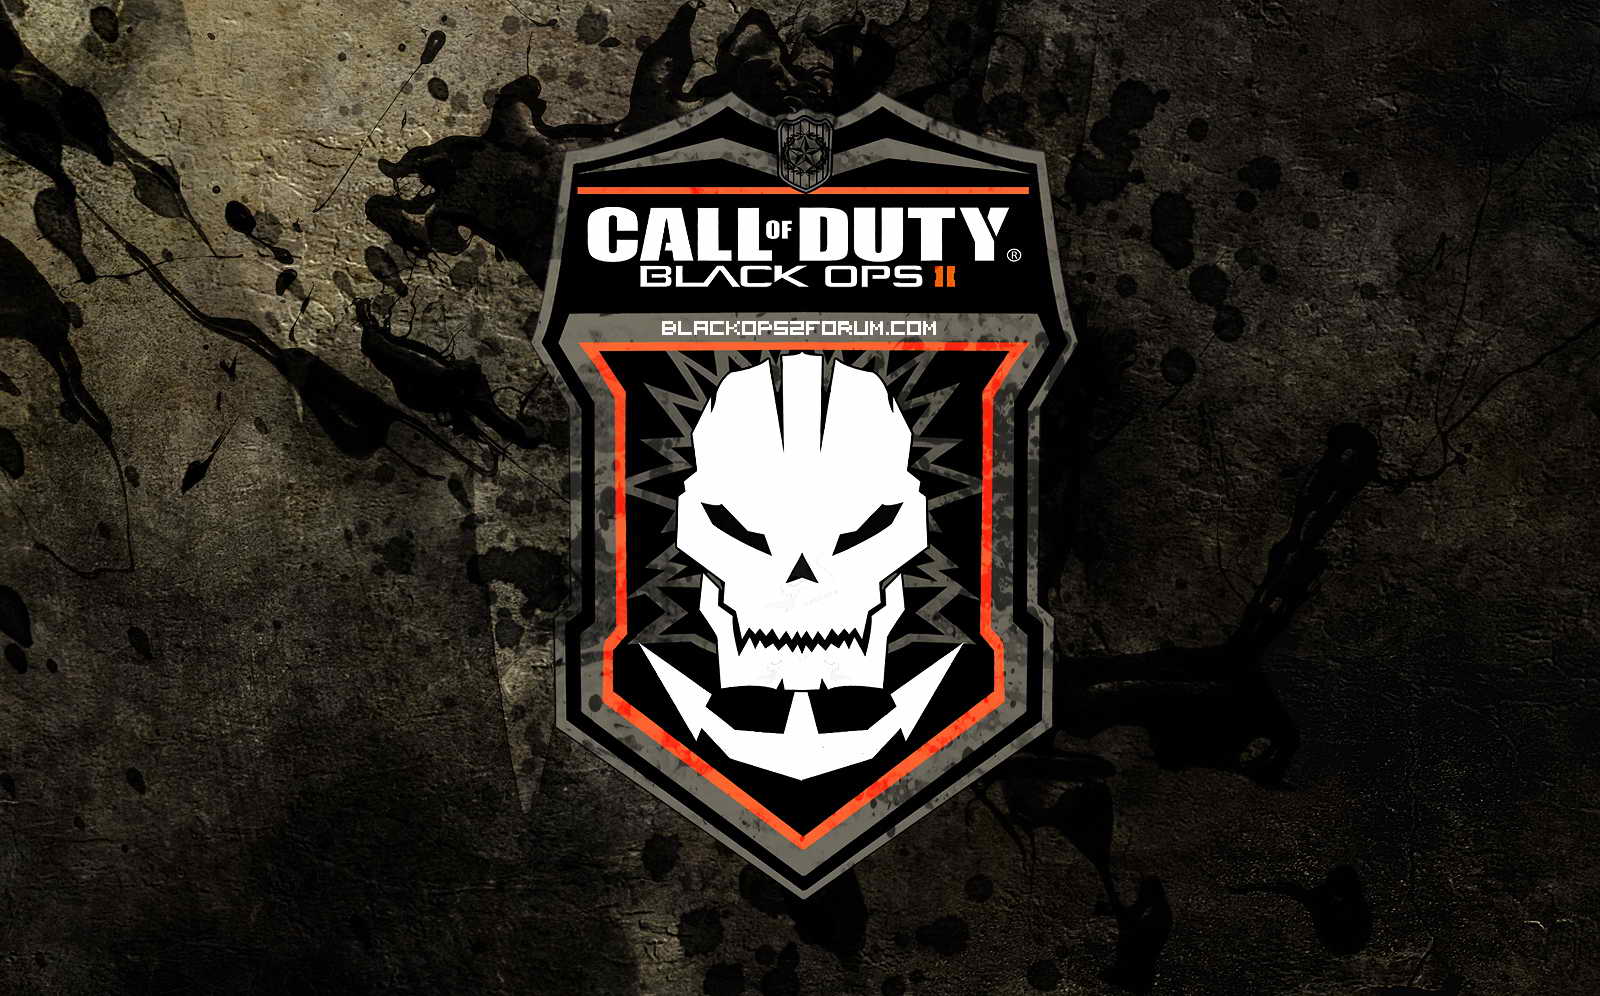 HD WALLPAPERS Call of Duty Black ops 2 HD Wallpapers 1600x996